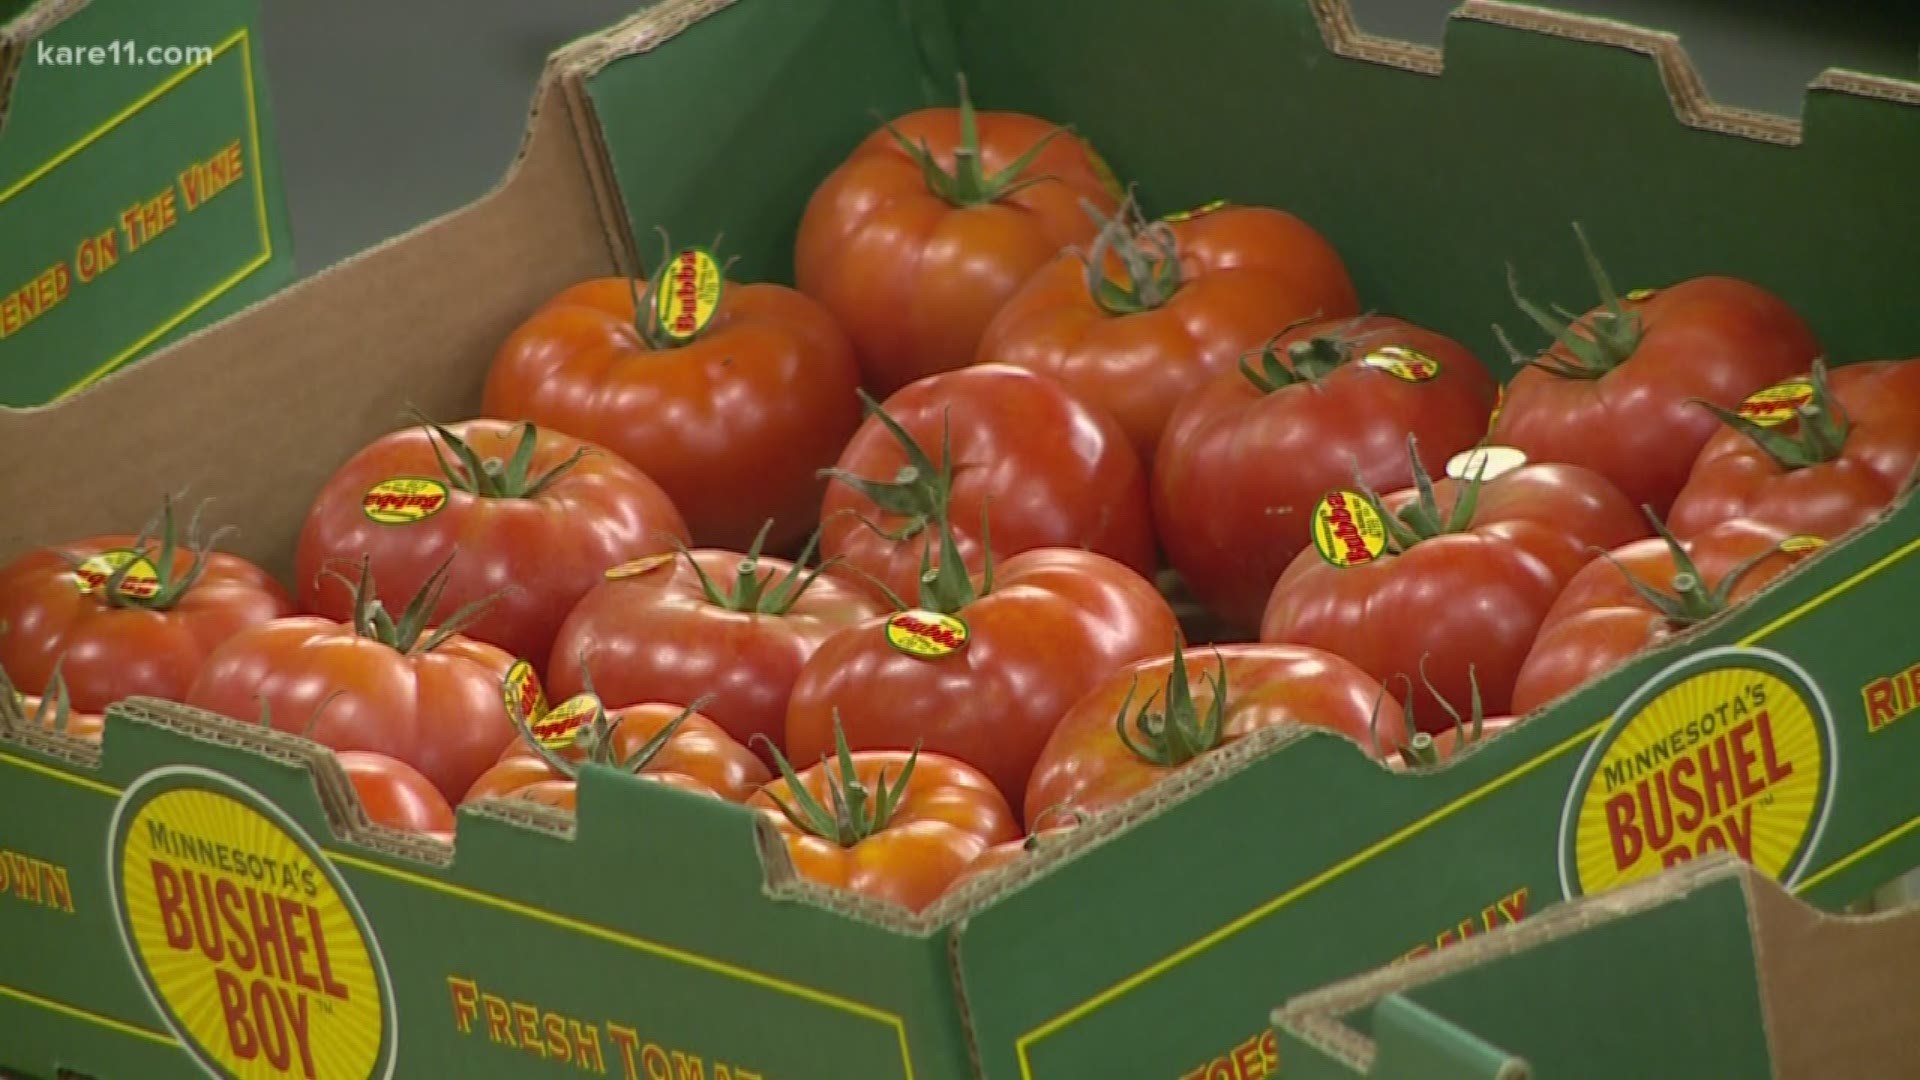 Owatonna-based Bushel Boy is donating 450 pounds of Minnesota tomatoes to Second Harvest Heartland. The gift was inspired by Twin Cities Chef Mike DeCamp, who created a special dish during the month of June featuring Bushel Boy tomatoes. For every dish sold last month Bushel Boy pledged to donate.